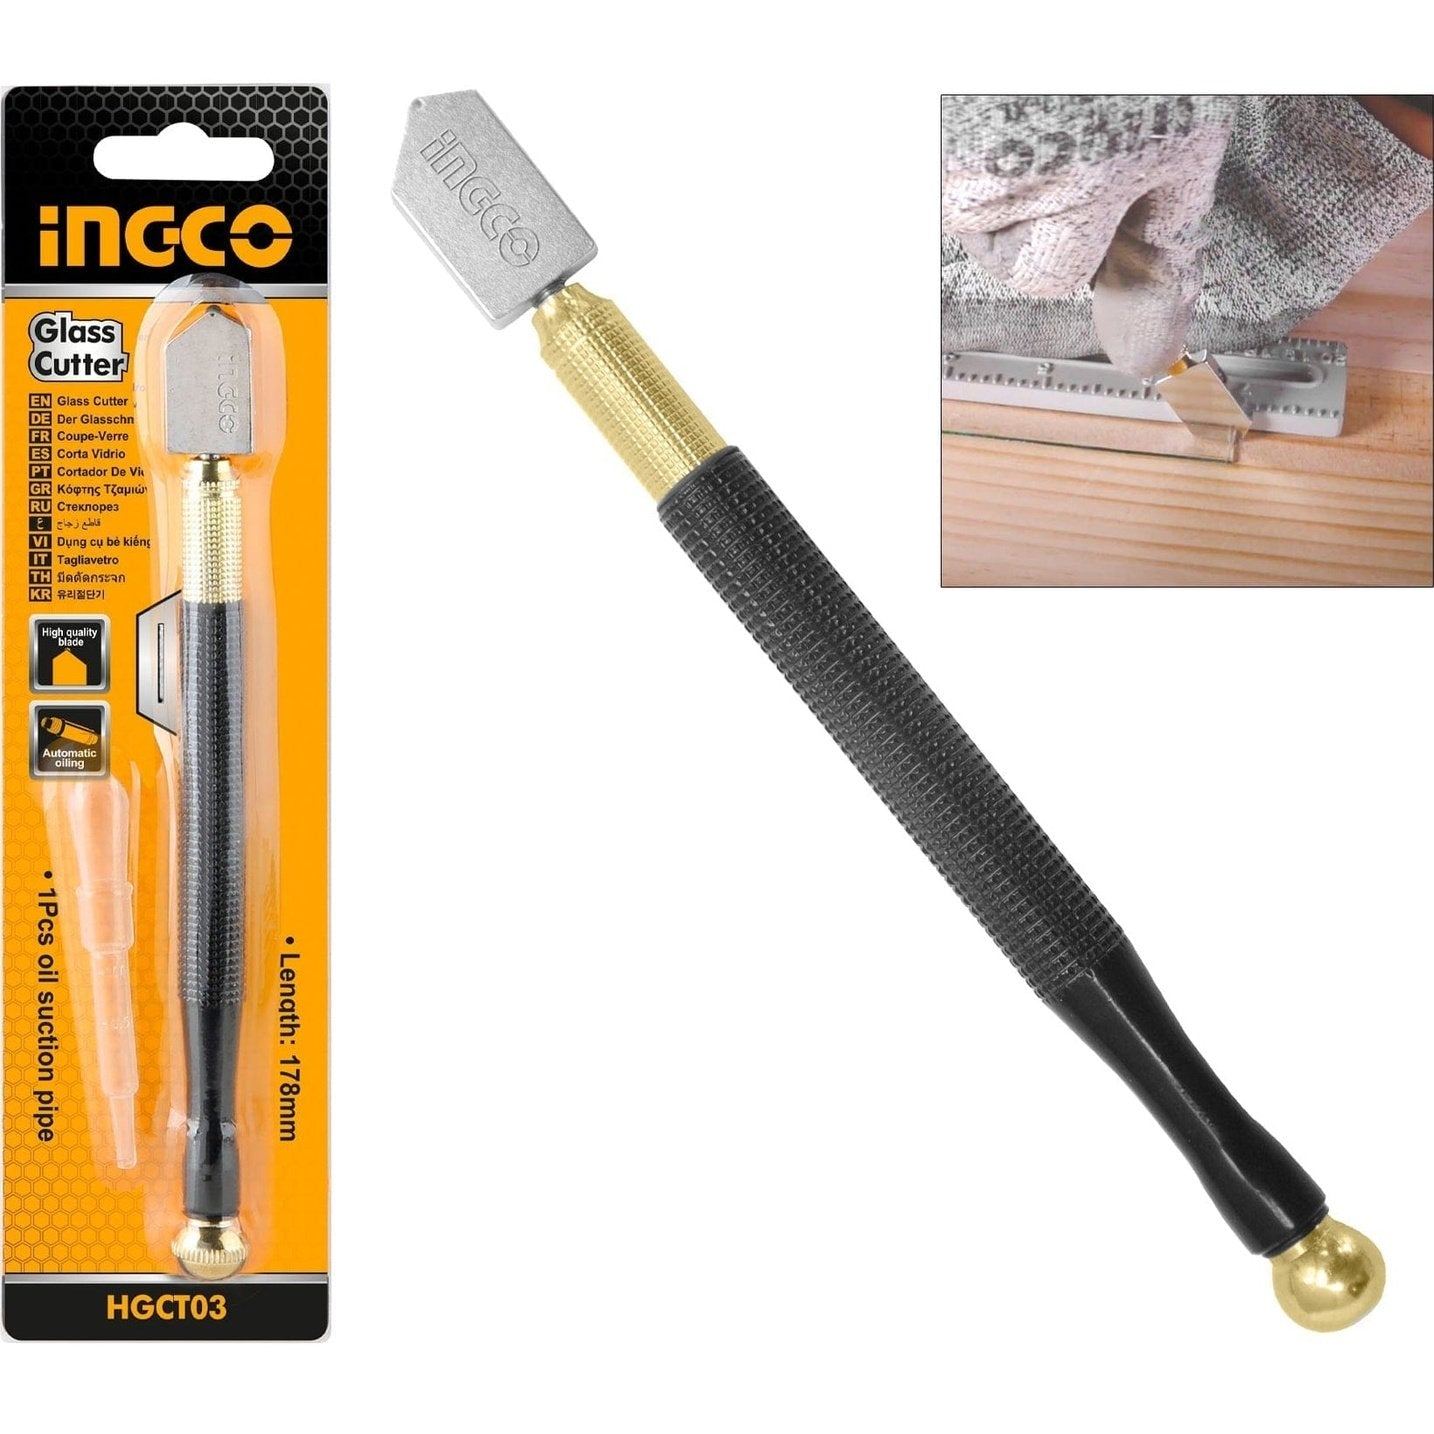 Ingco Heavy Duty Glass Cutter HGCT03 | Supply Master Accra, Ghana Hand Saws & Cutting Tools Buy Tools hardware Building materials